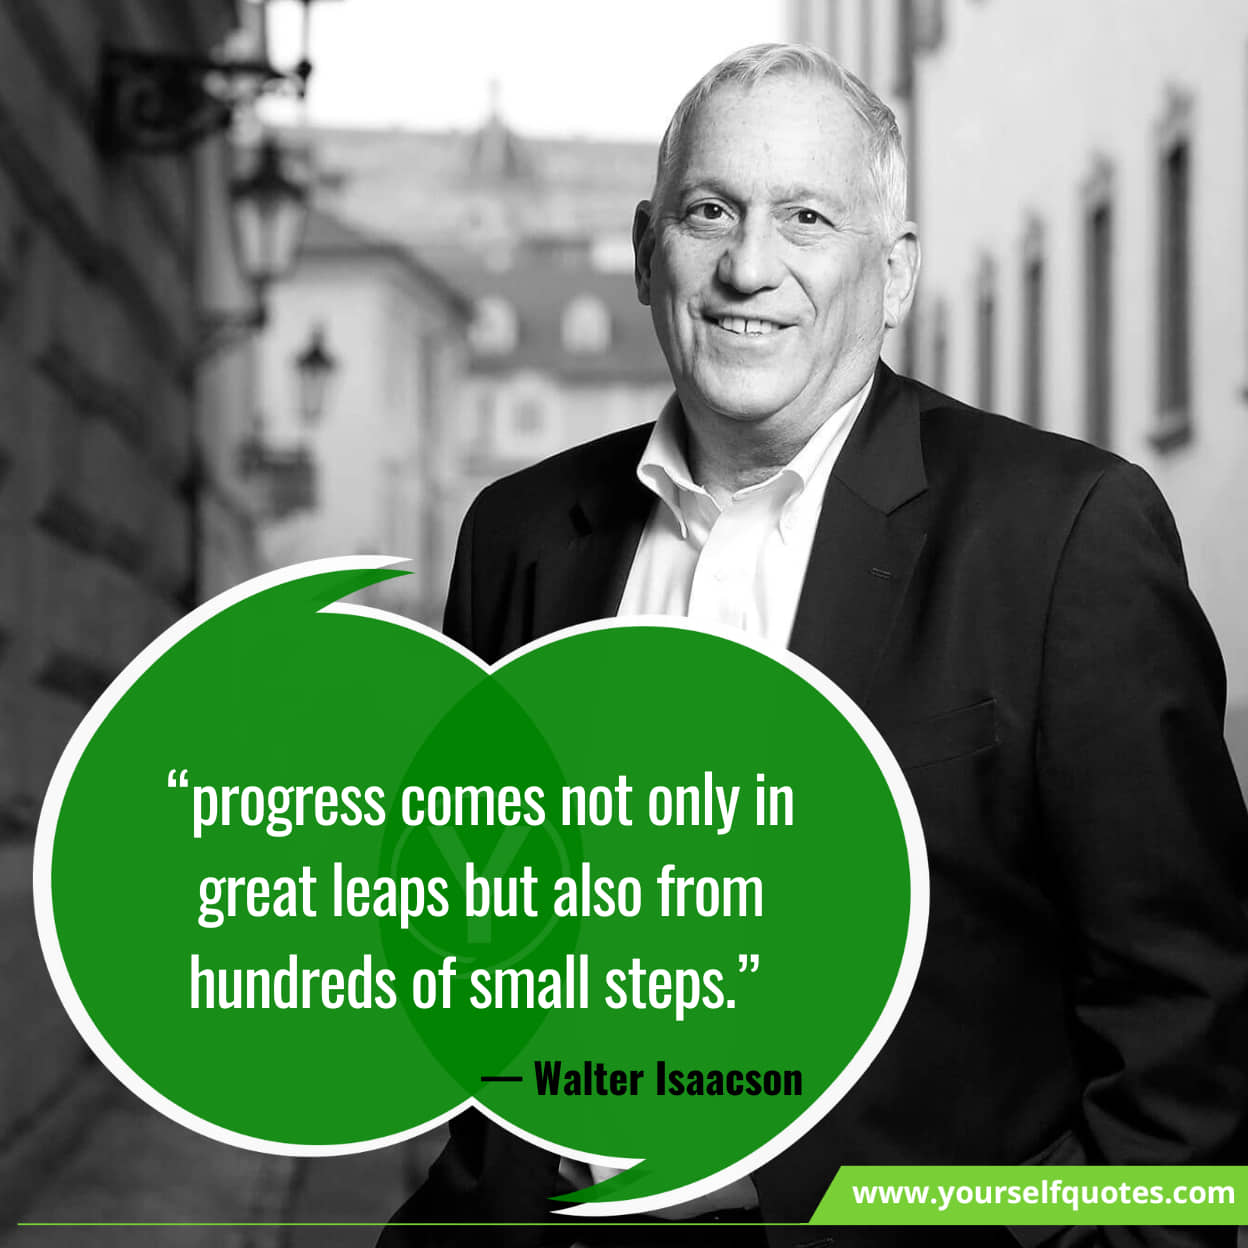 Motivational Quotes Of Walter Isaacson